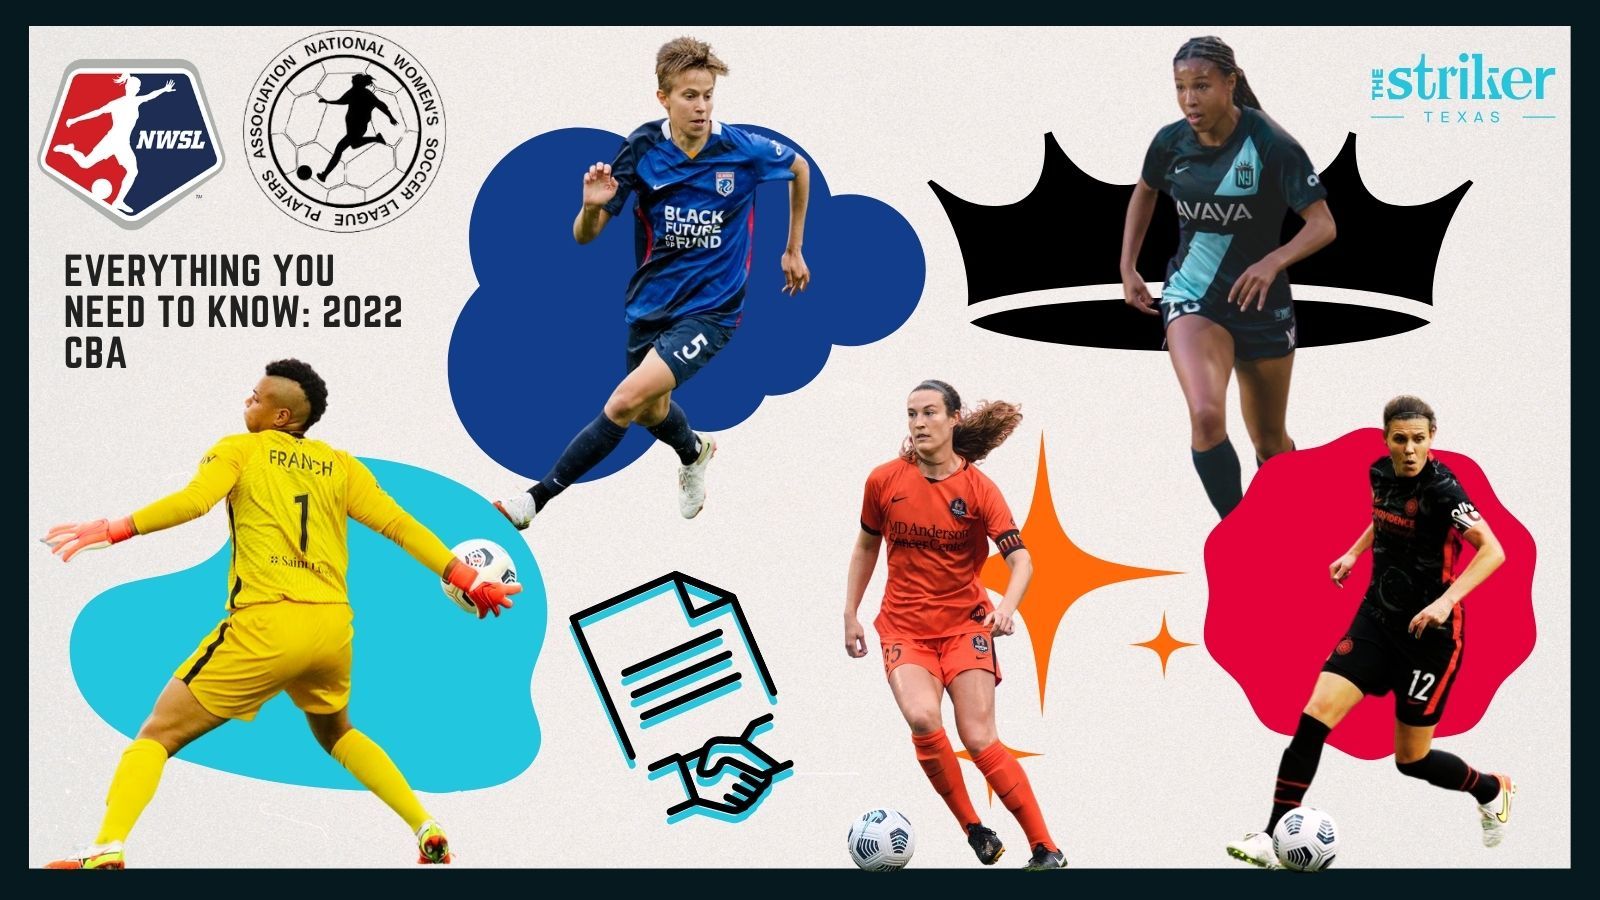 Everything you need to know about the firstever NWSL CBA